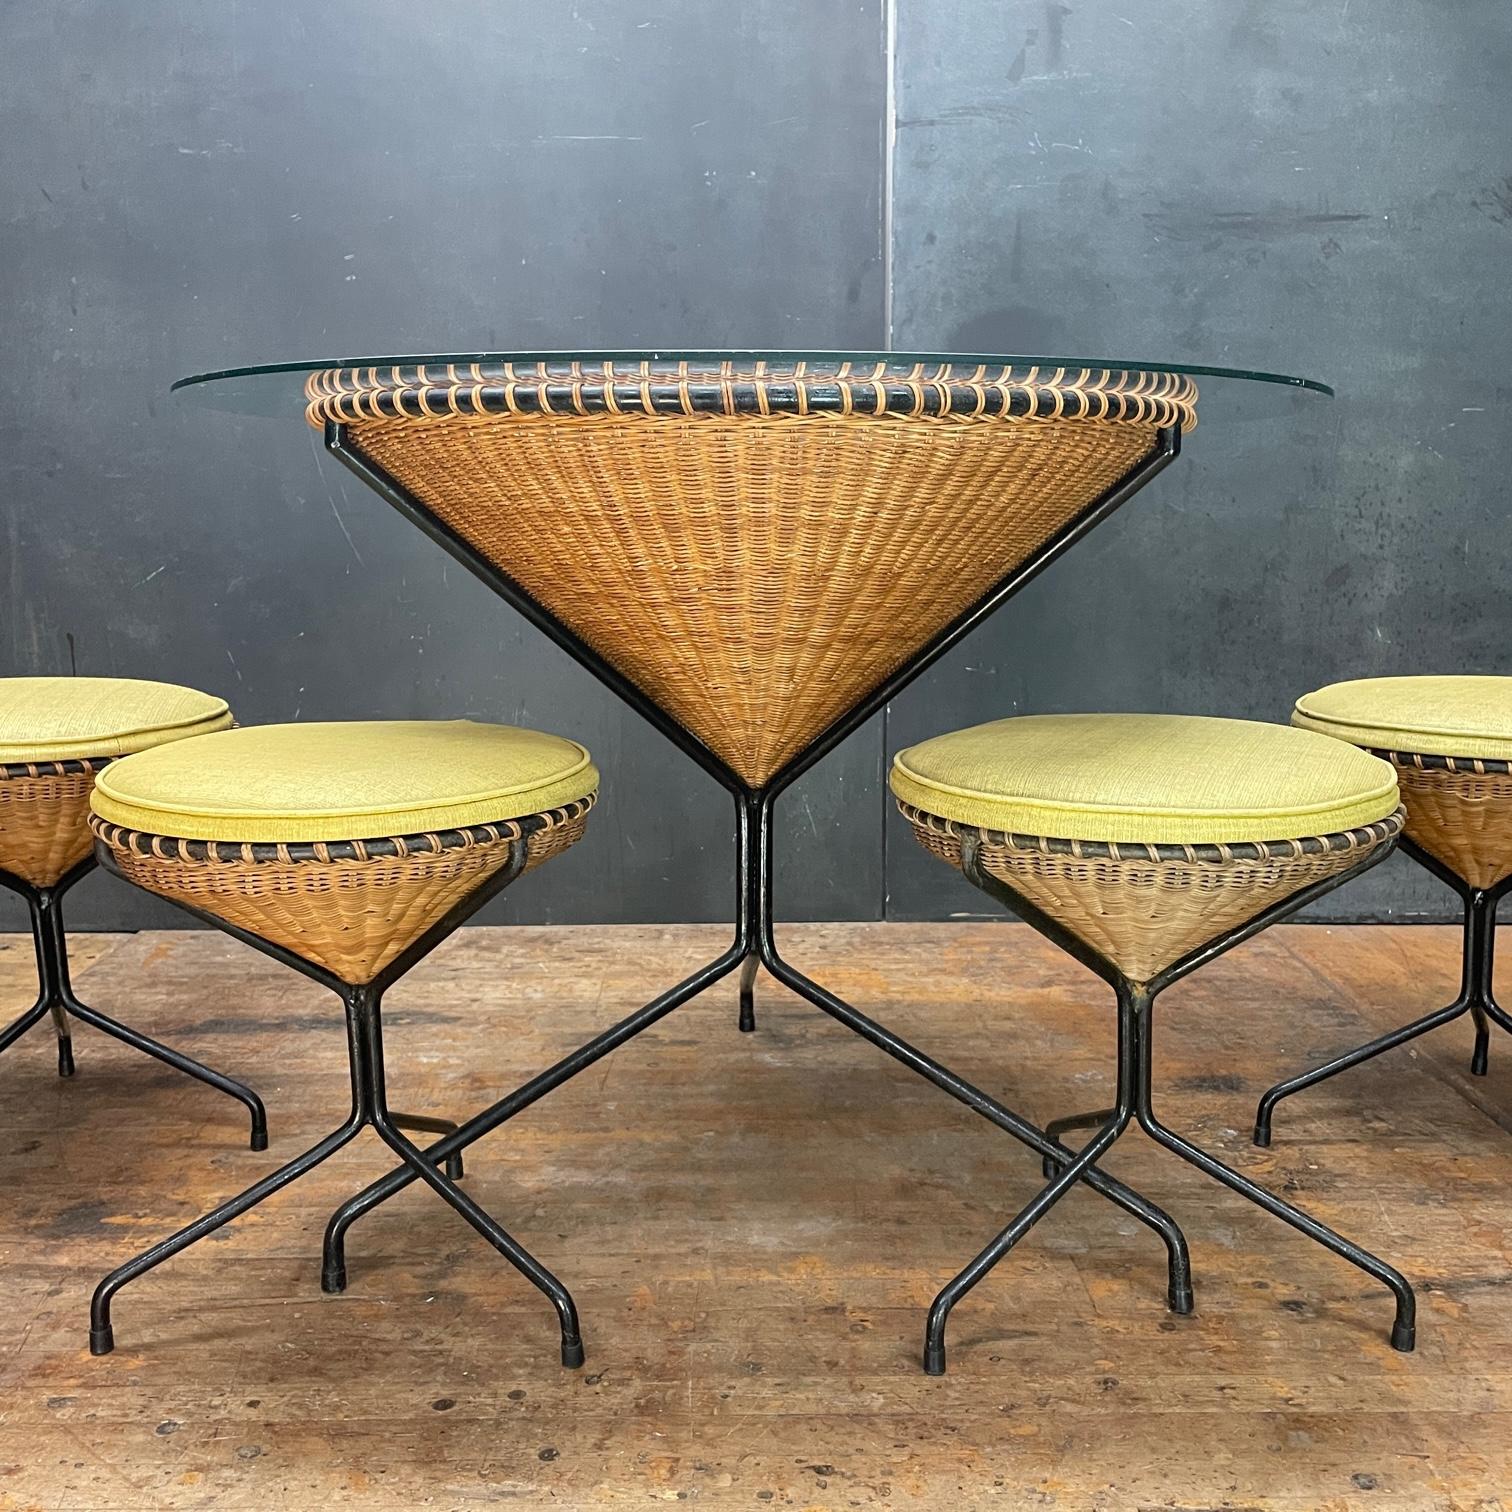 Super cabin-modern and hard to find California design outdoor patio set. 

The wicker on all pieces is still in very good condition! All these pieces were procured together, and are in original unrestored condition. The upholstery on the 4 stools